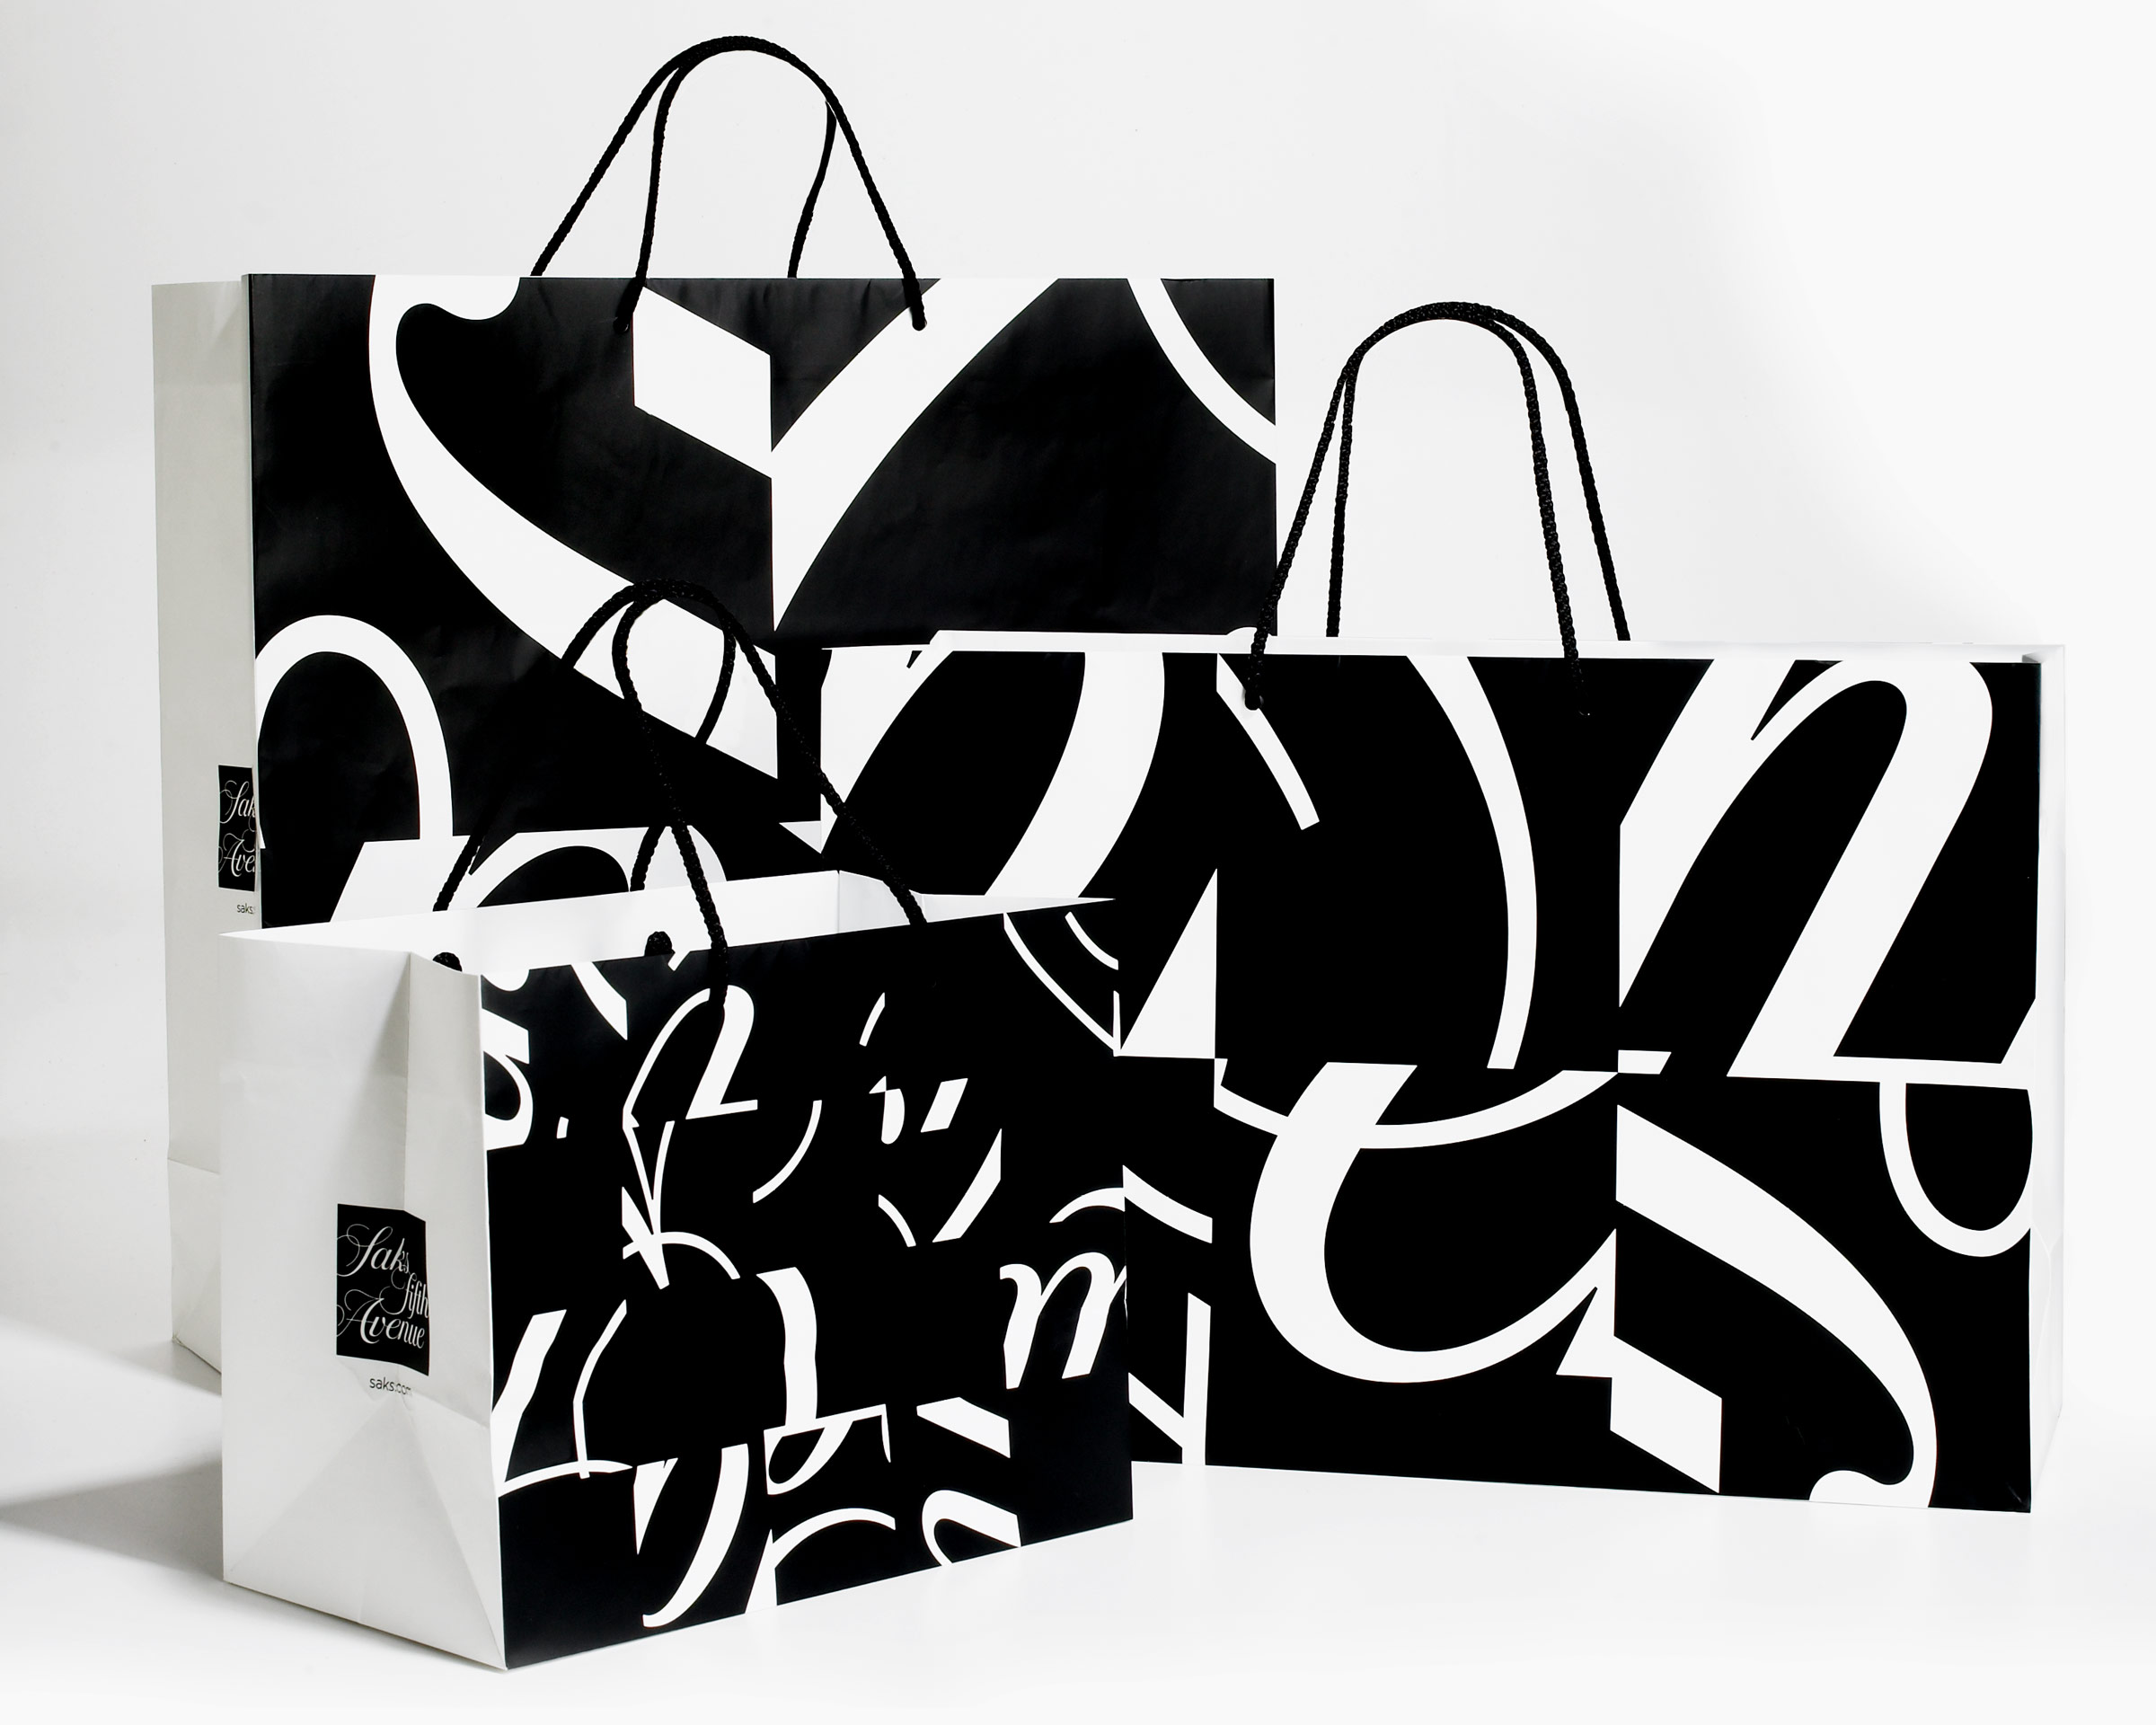 Saks Fifth Avenue shopping bags